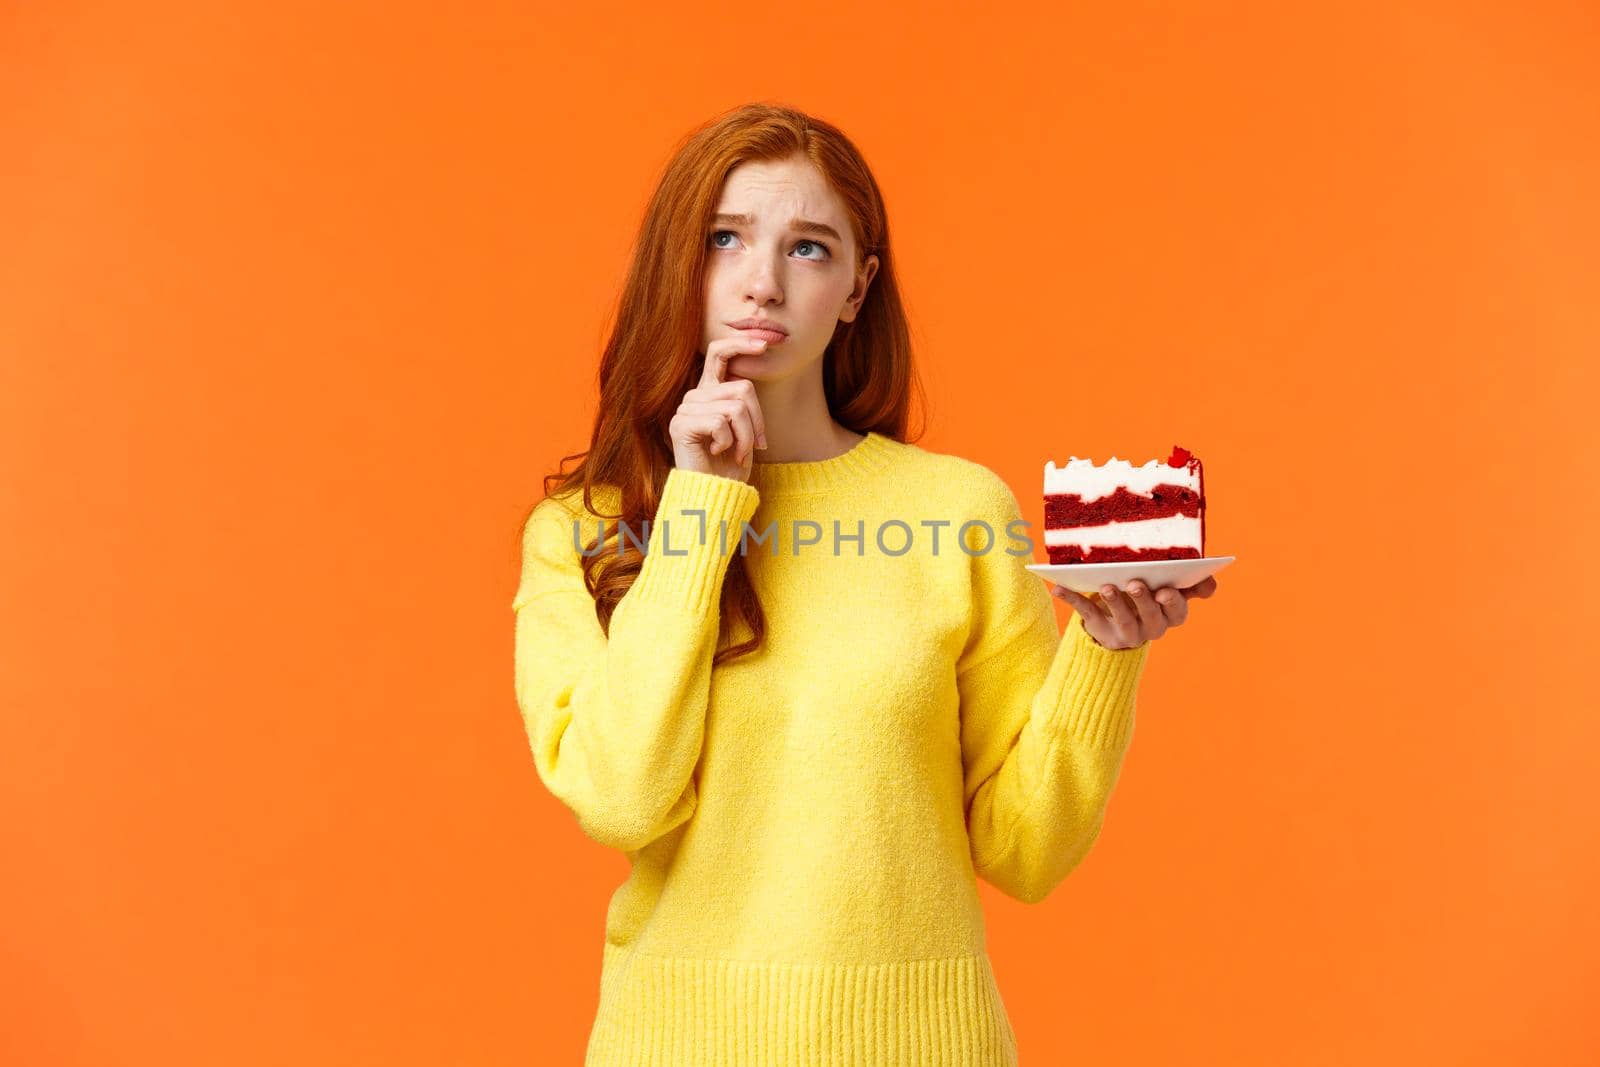 Worried, concerned silly young redhead girl taking care her body, calculating calories, being diet and want eat delicious cake, holding piece of dessert, look up thoughtful and troubled, orange wall.